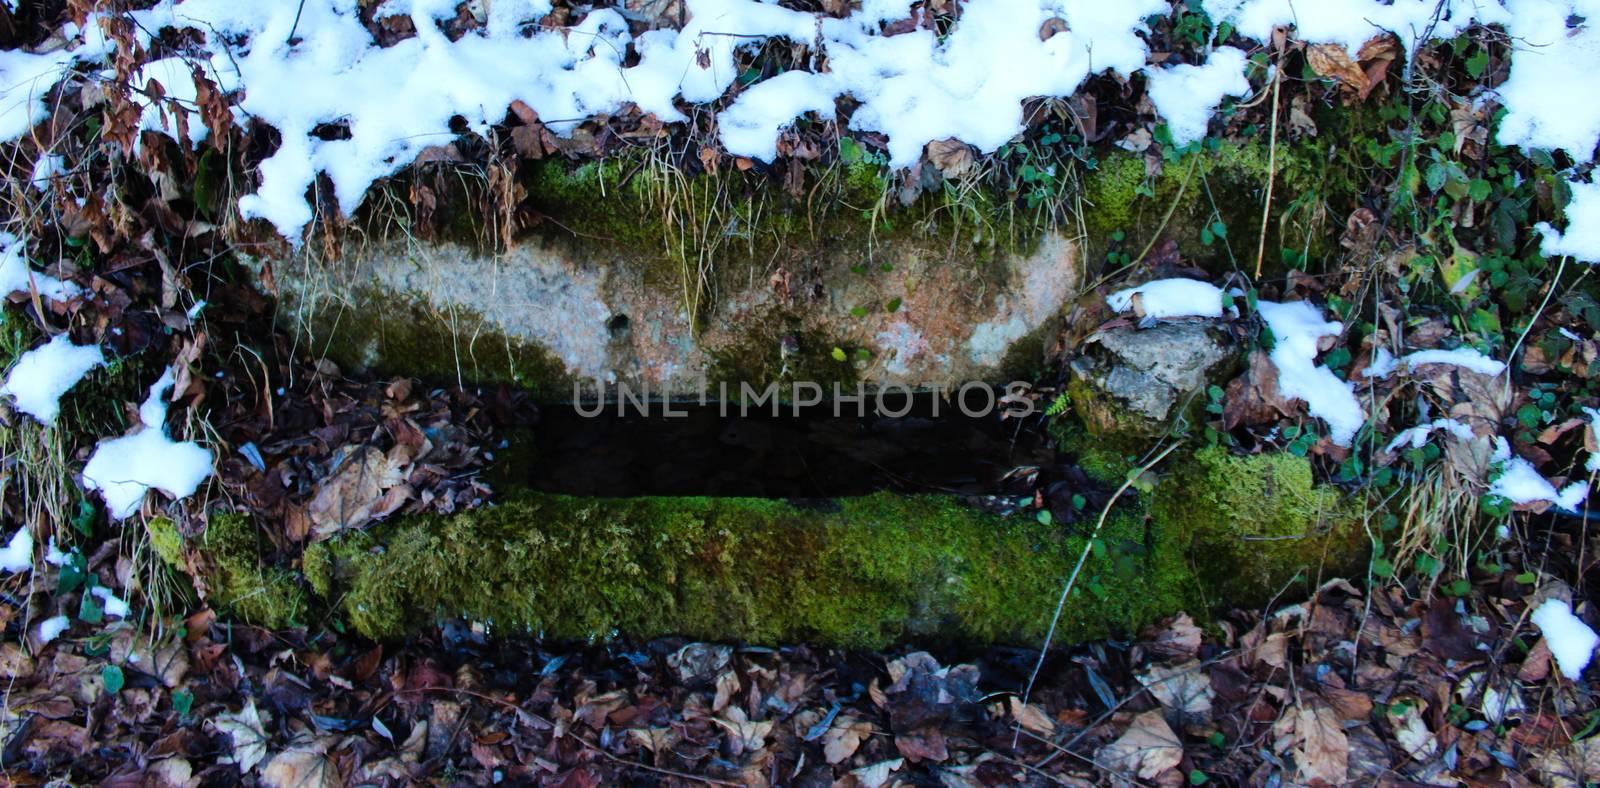 Watering can for cattle. A stone trough where there is water that is overgrown with moss. It is winter and there is snow all around.